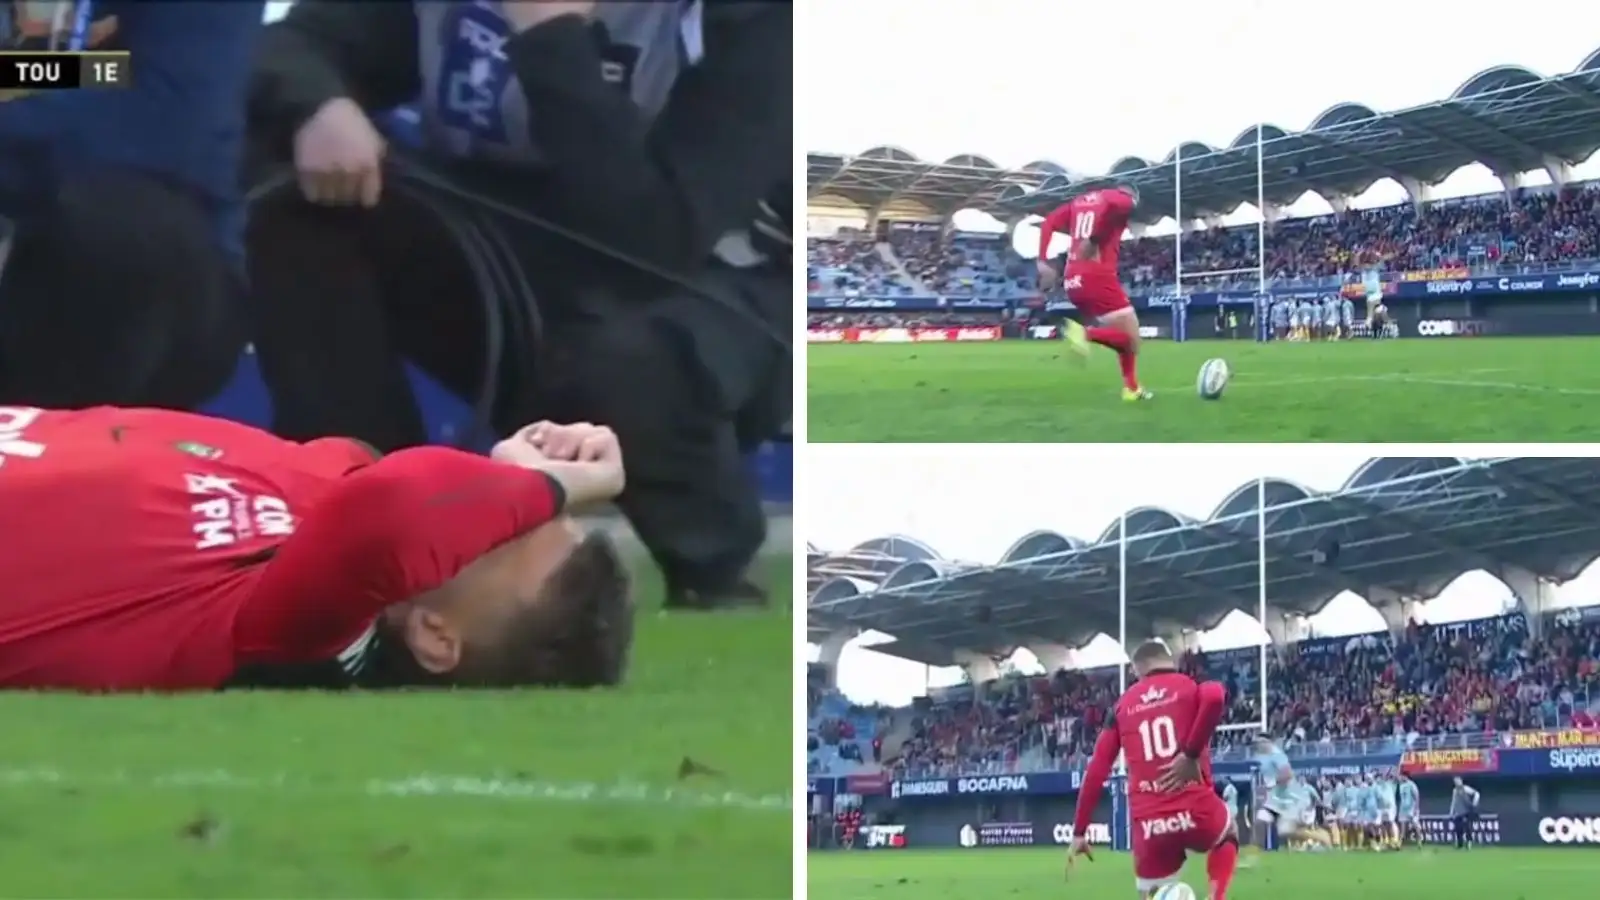 Wales fly-half Dan Biggar injures himself while attempting a conversion for Toulon.